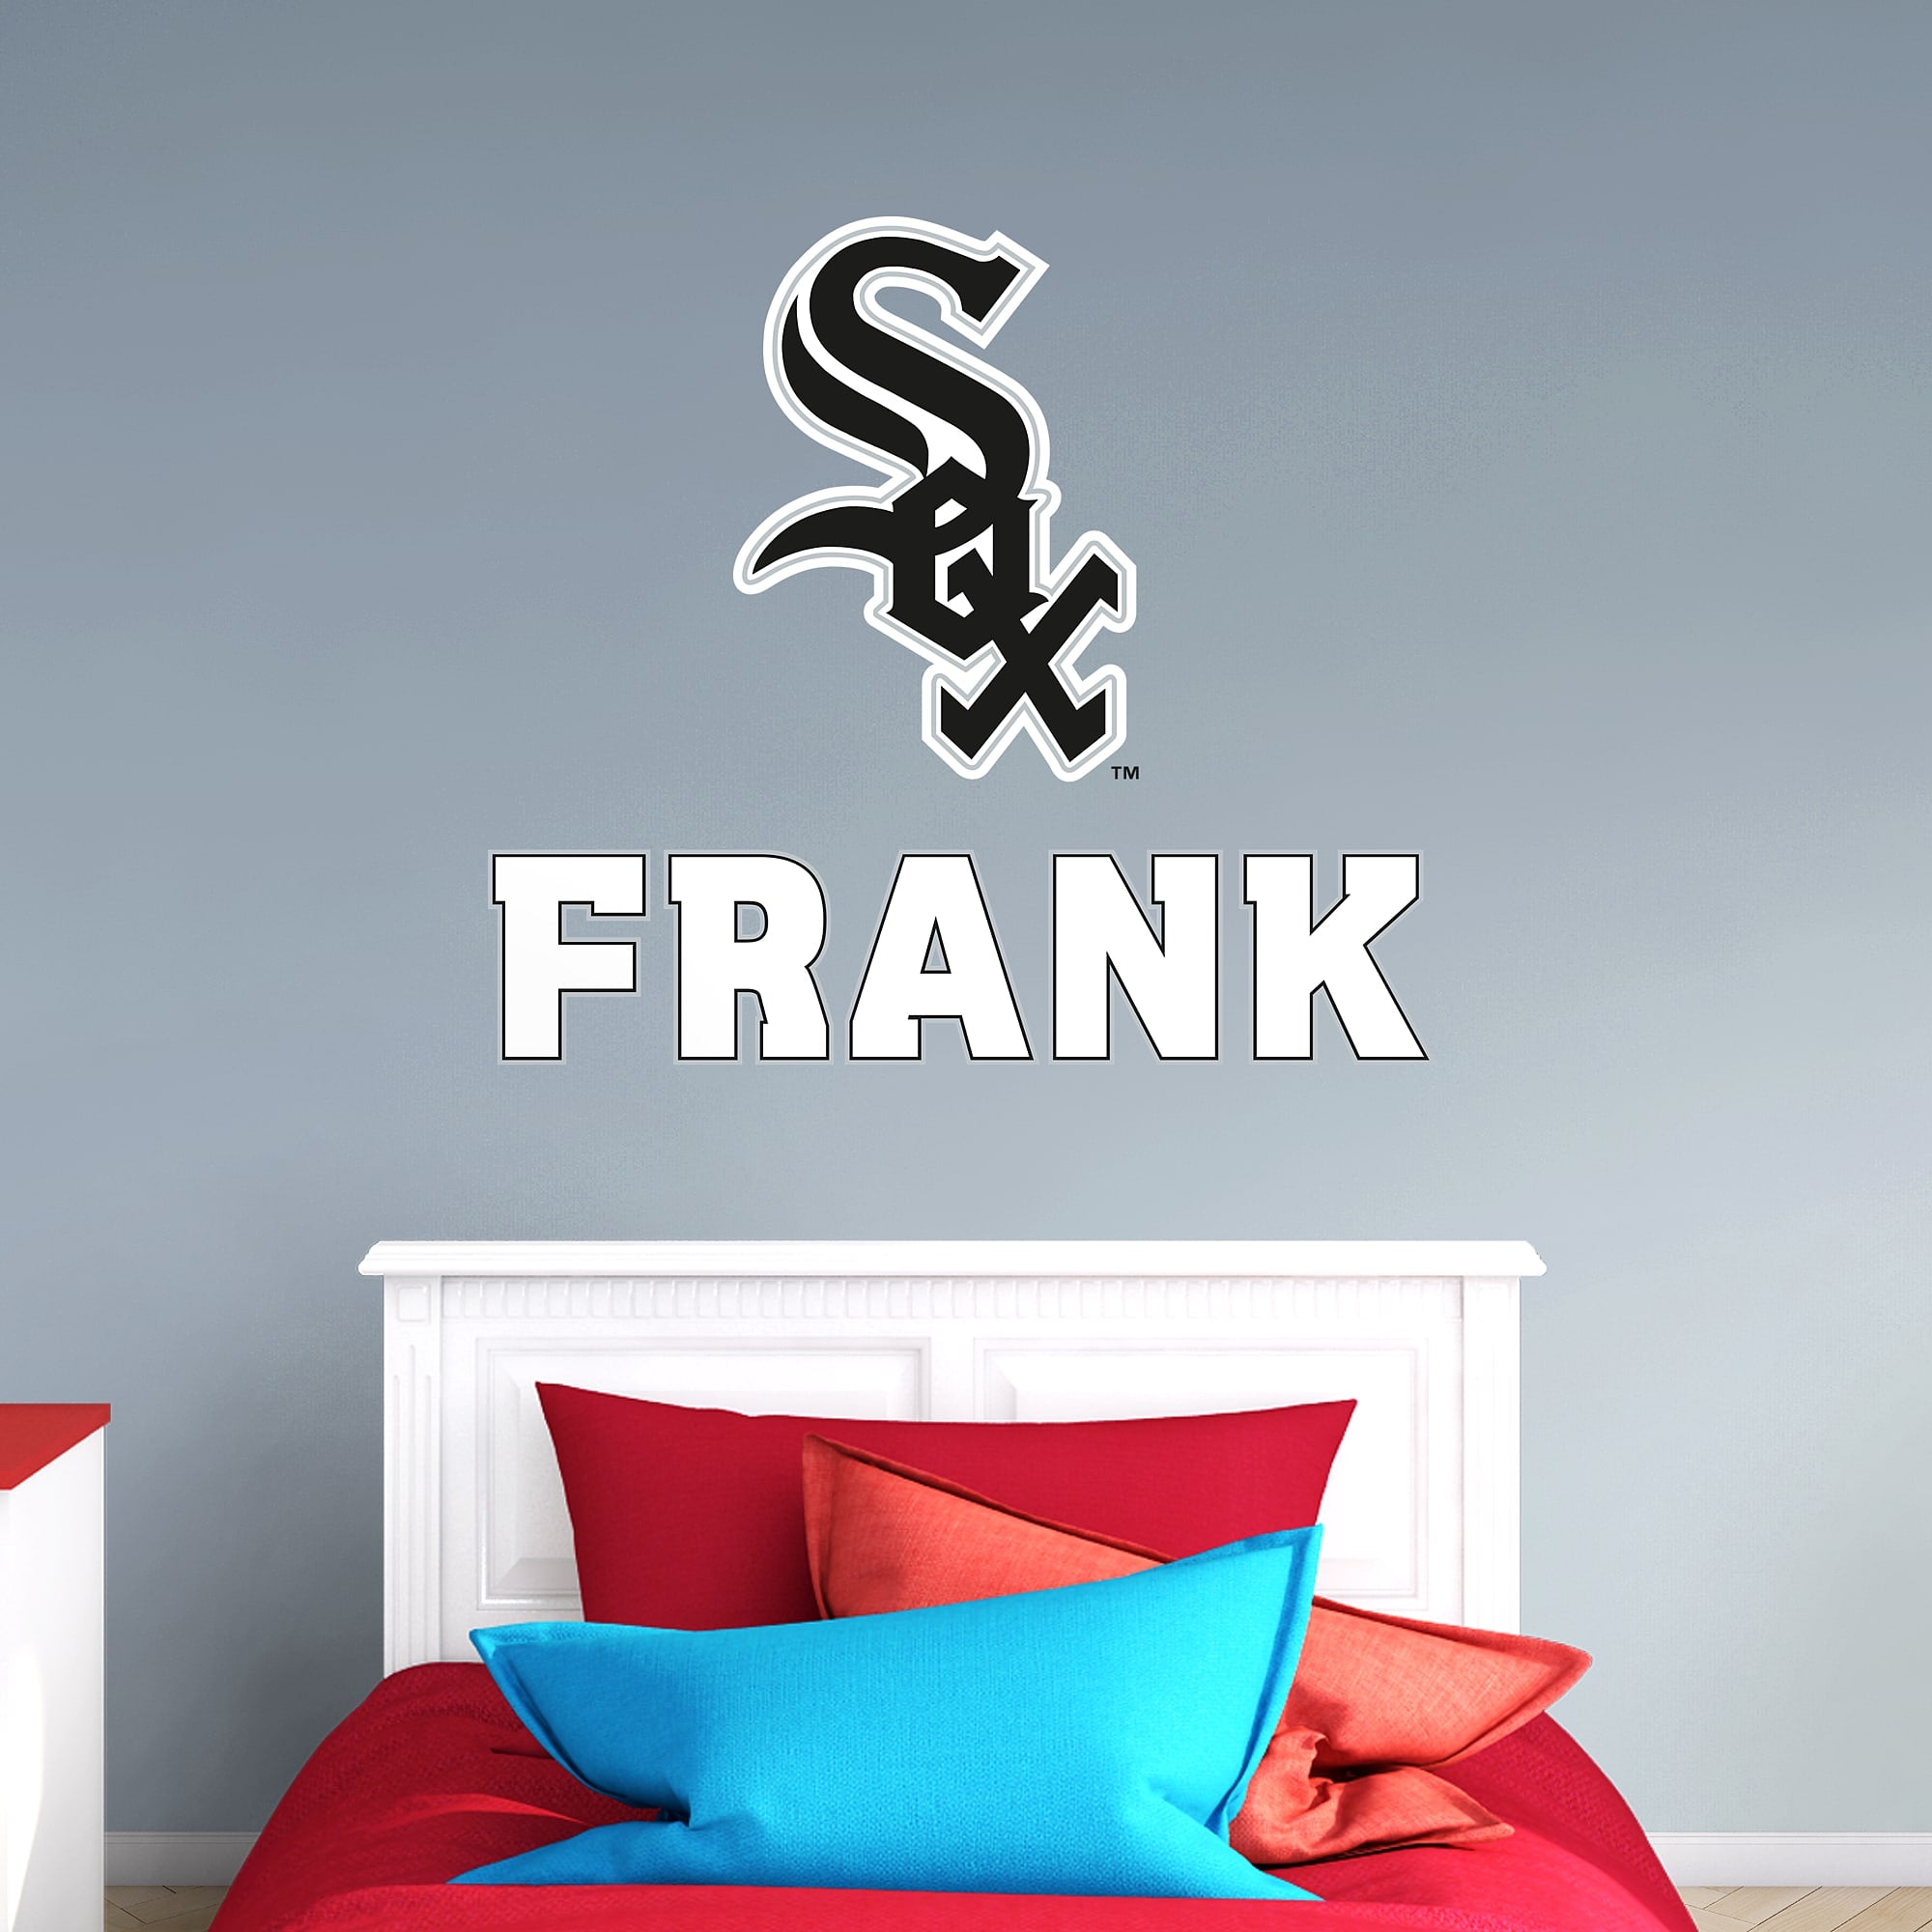 Chicago White Sox: Stacked Personalized Name - Officially Licensed MLB Transfer Decal in White (52"W x 39.5"H) by Fathead | Viny